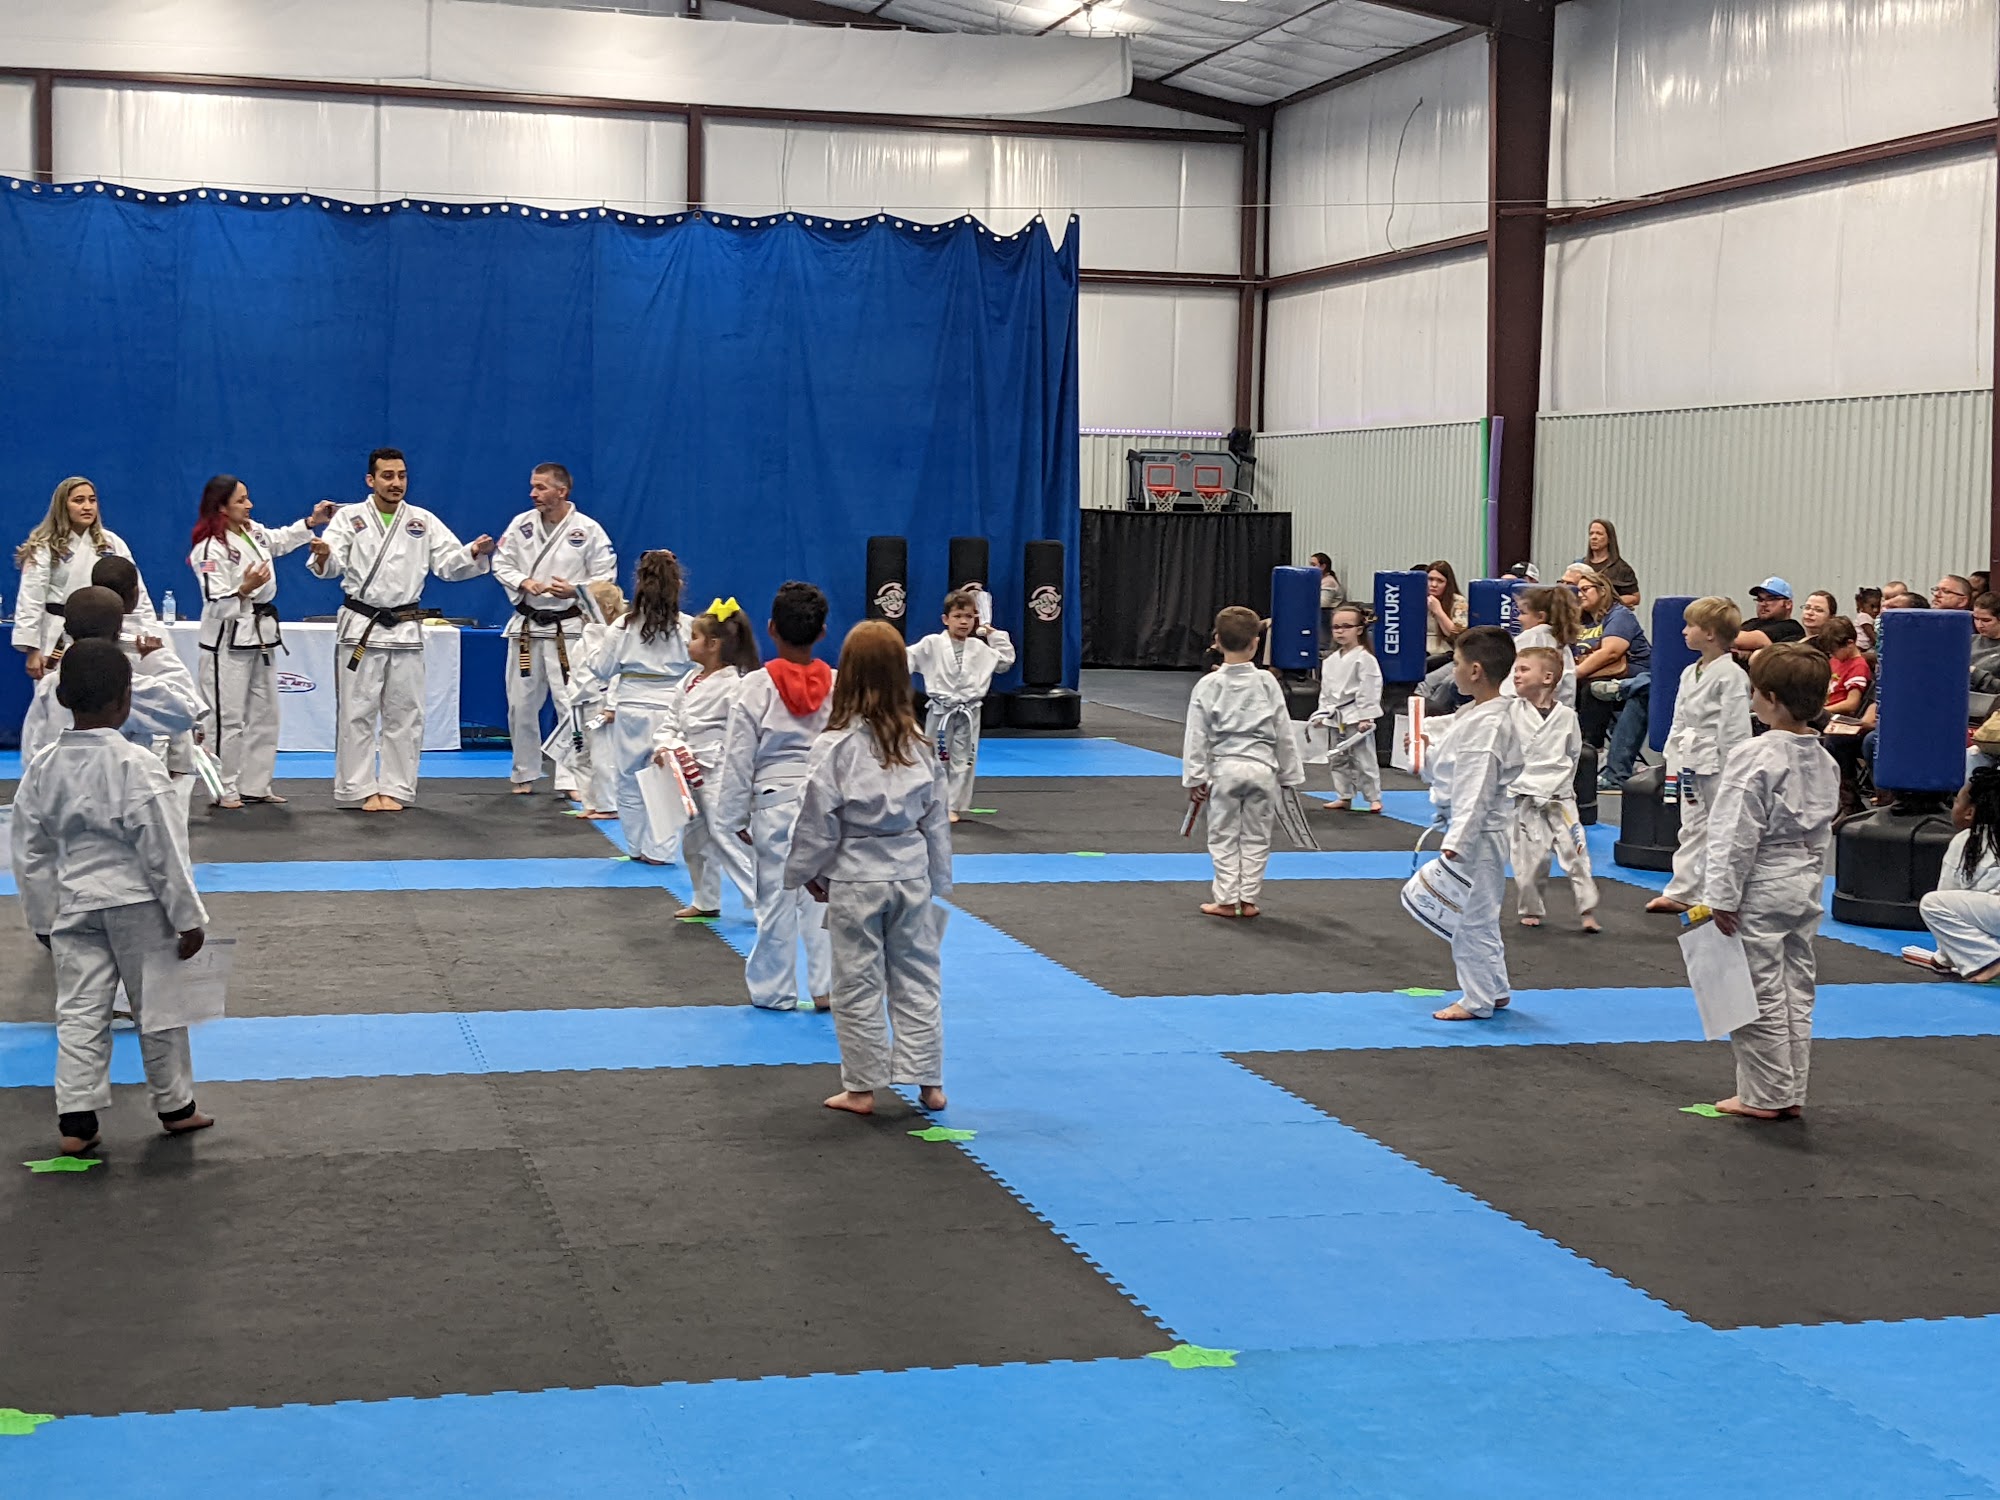 Inspire Youth Sports - Martial Arts, Dance, After School and Summer Camp